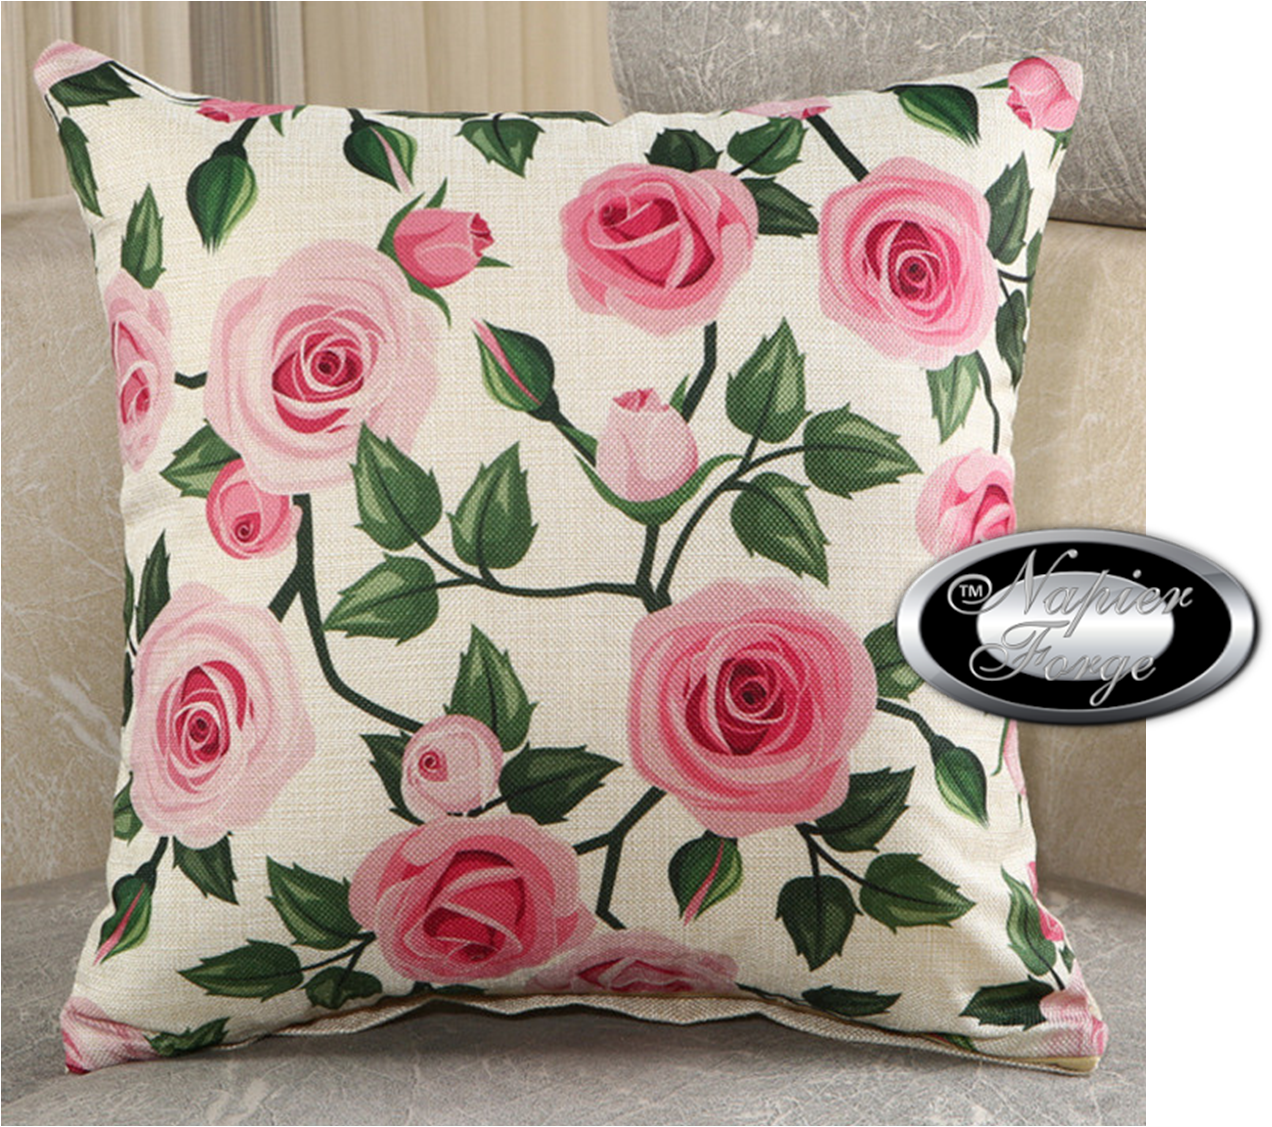 Farmhouse Cotton Linen Blend Cushion Cover 45cm x 45cm - Design Shades of Pink English Rose *Free Shipping